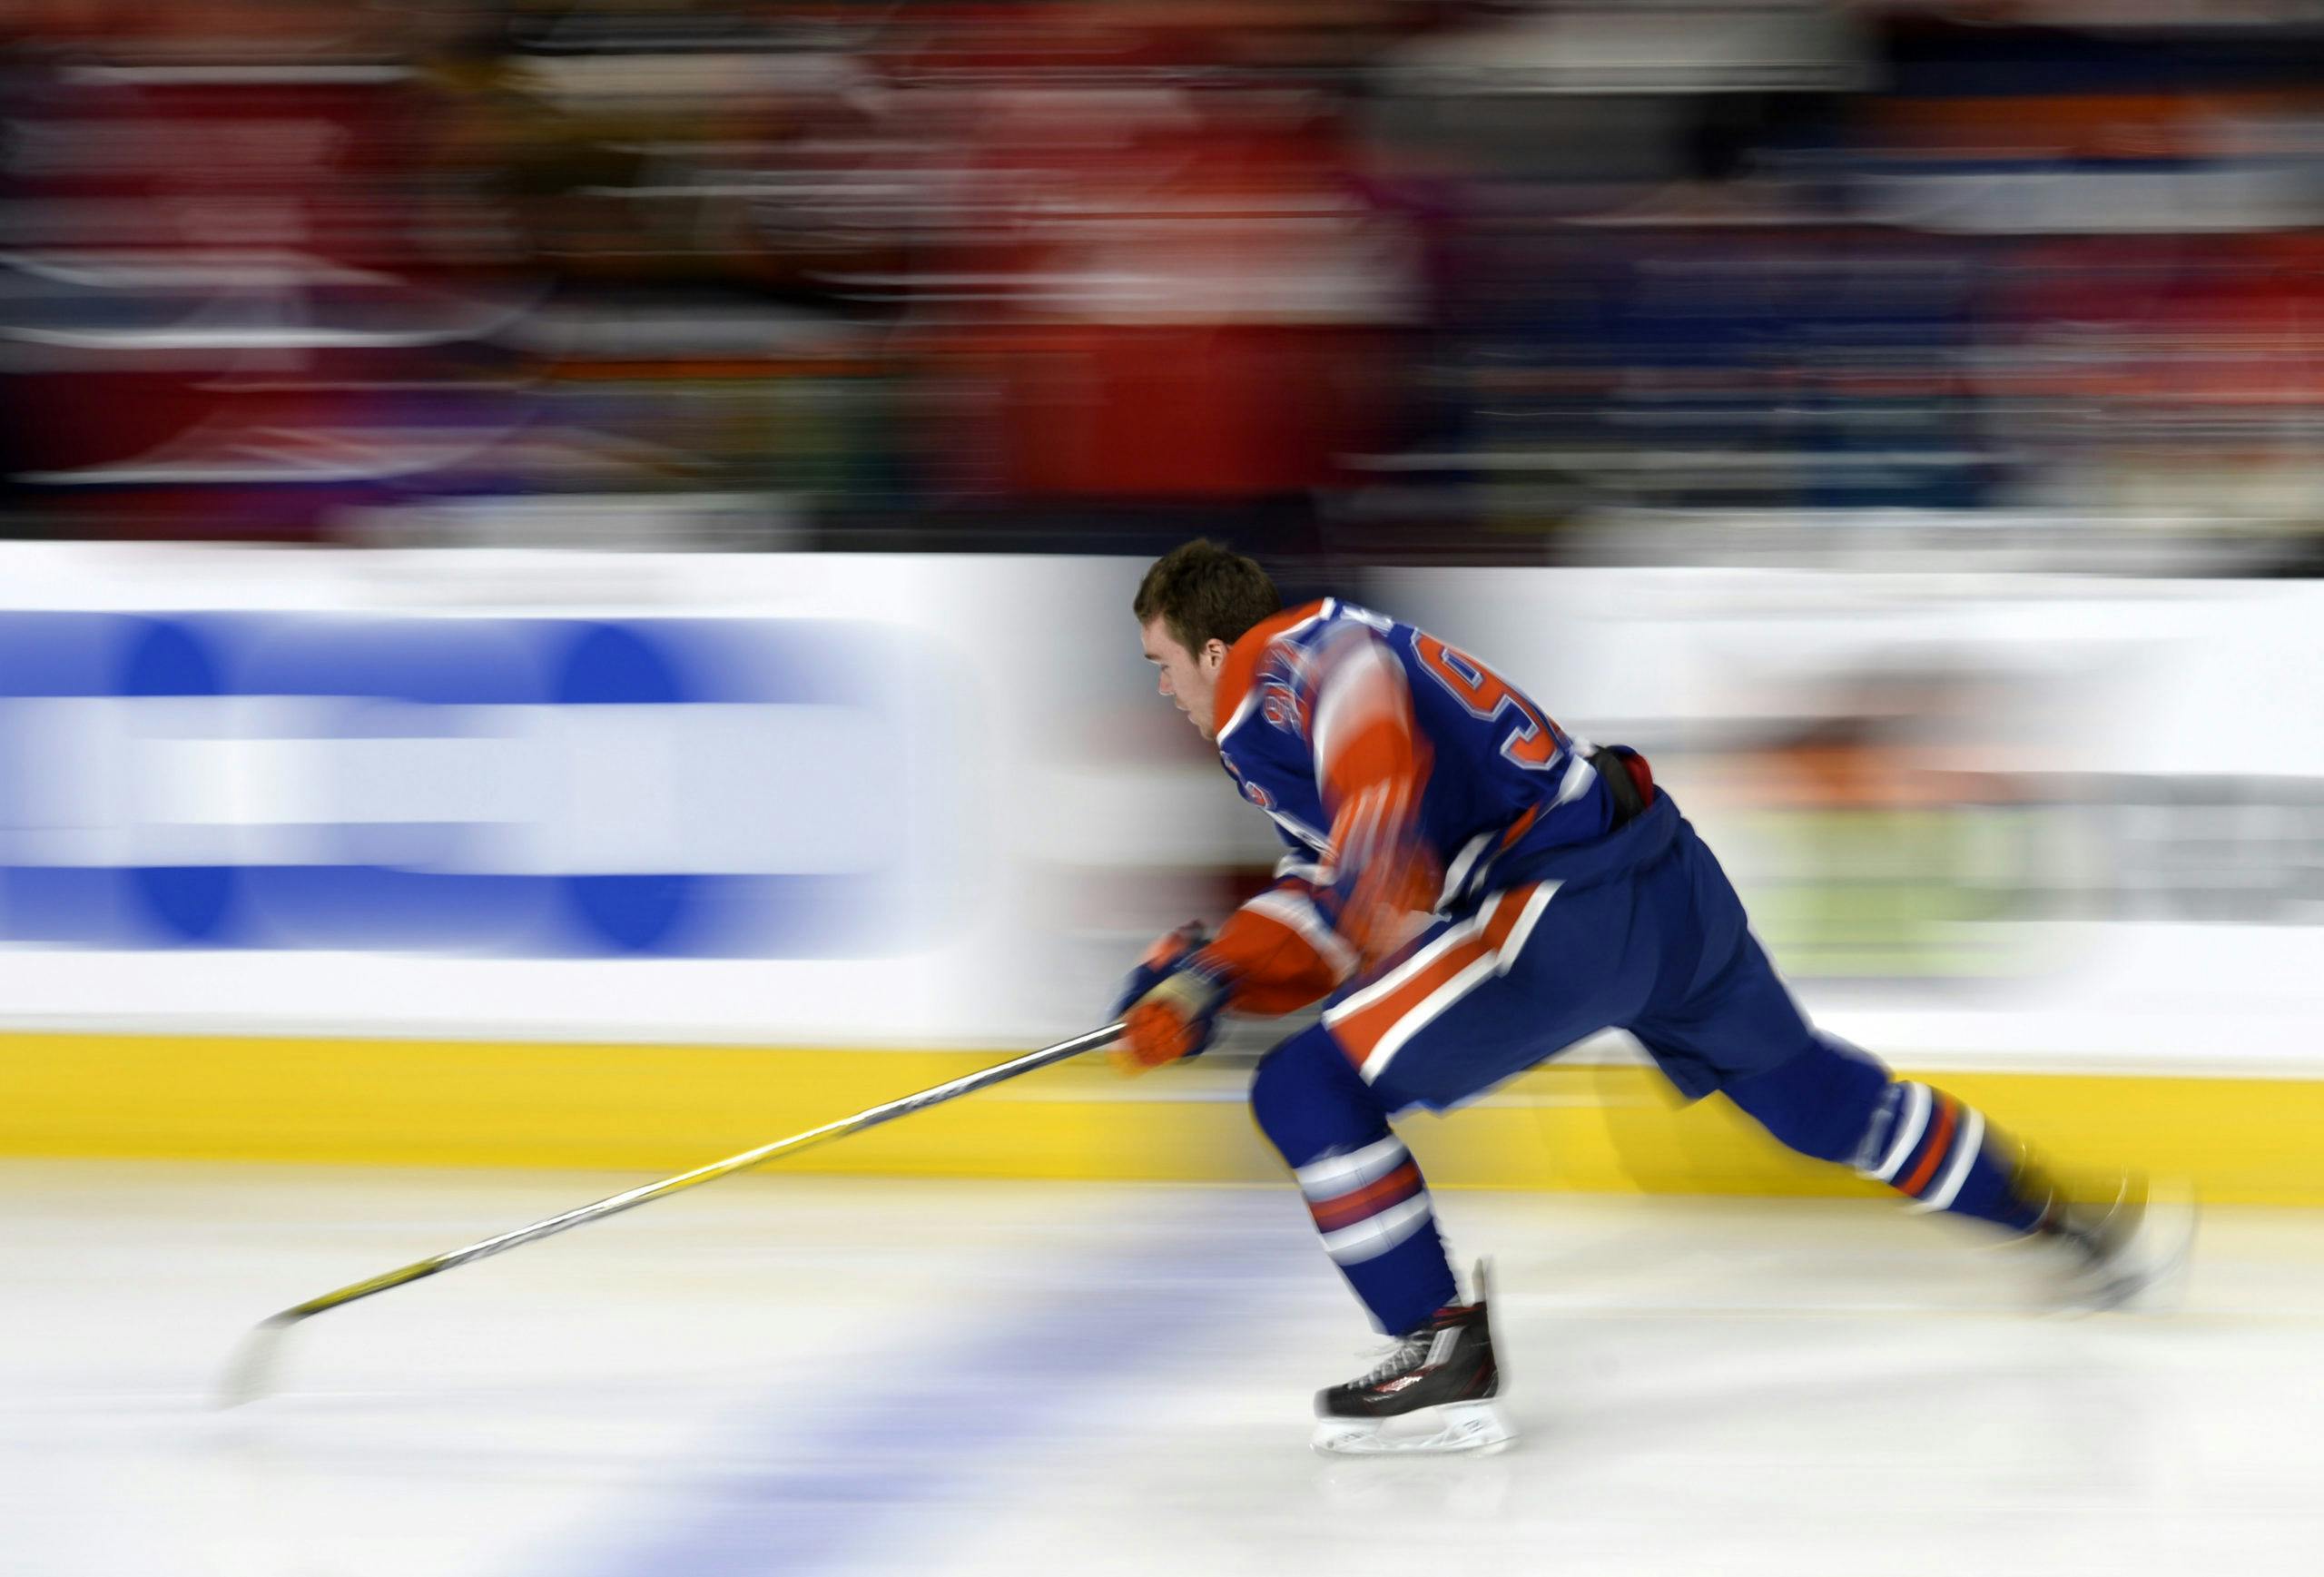 NHL Skills Competition lineup announced, Connor McDavid and Leon